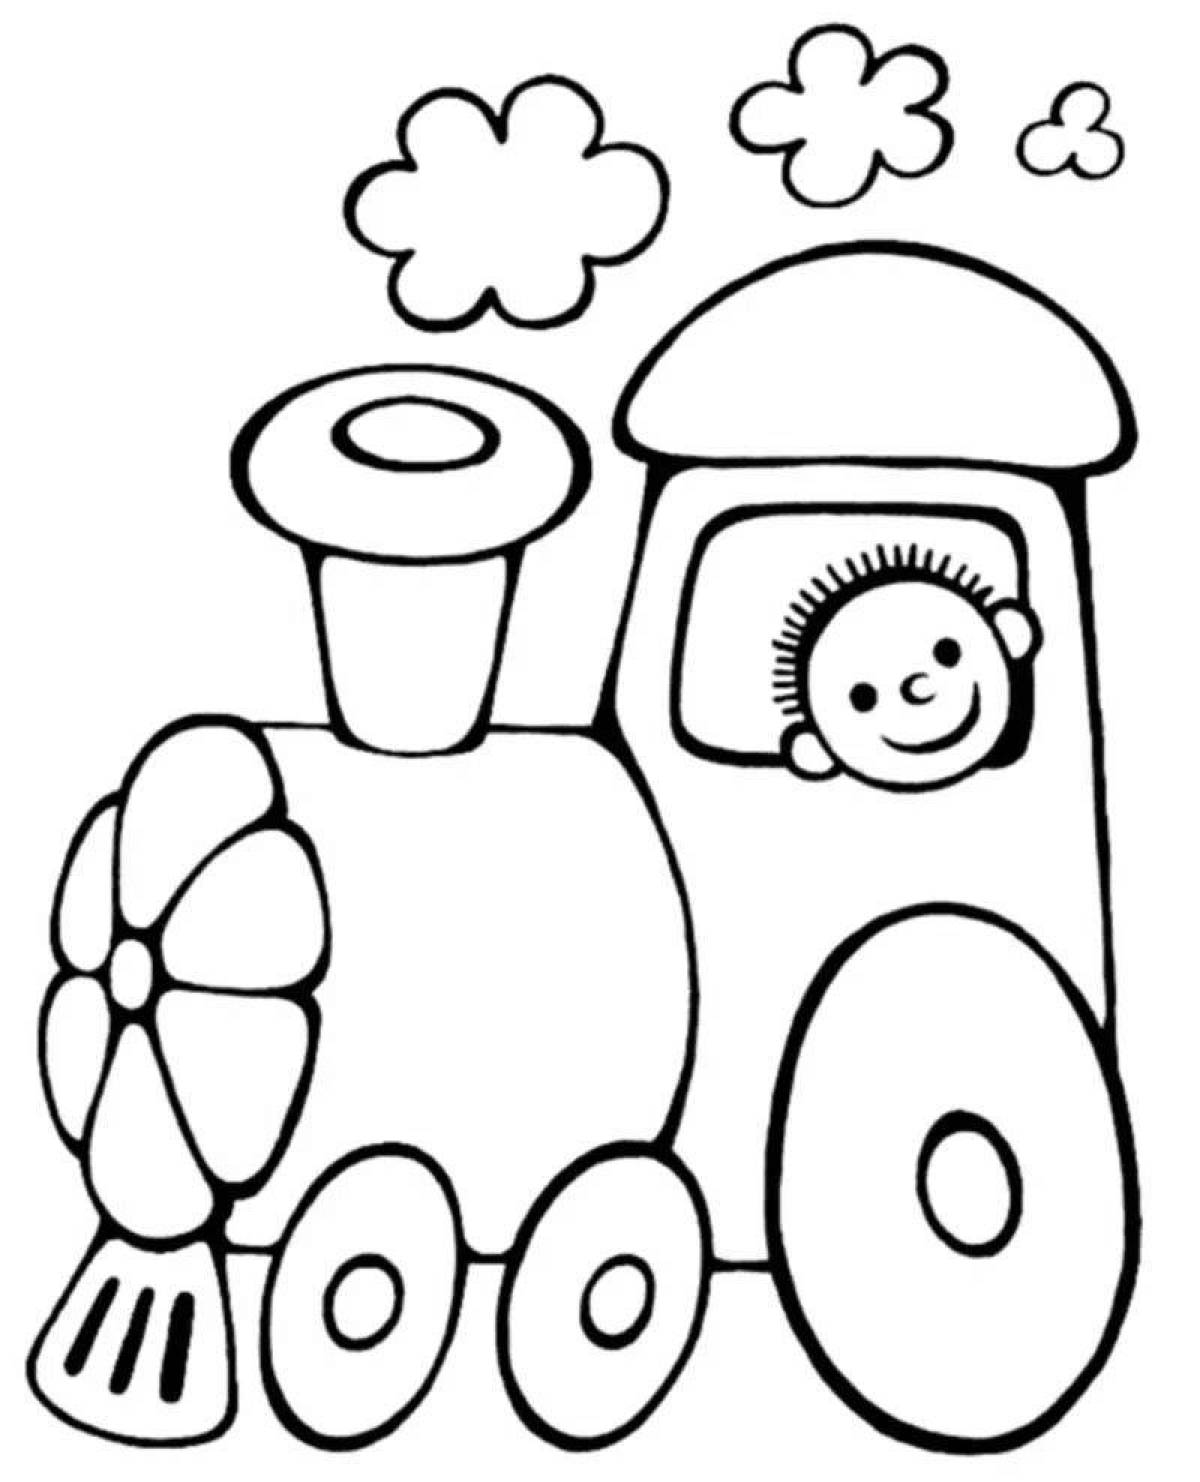 Coloring book for toddlers 2 years old